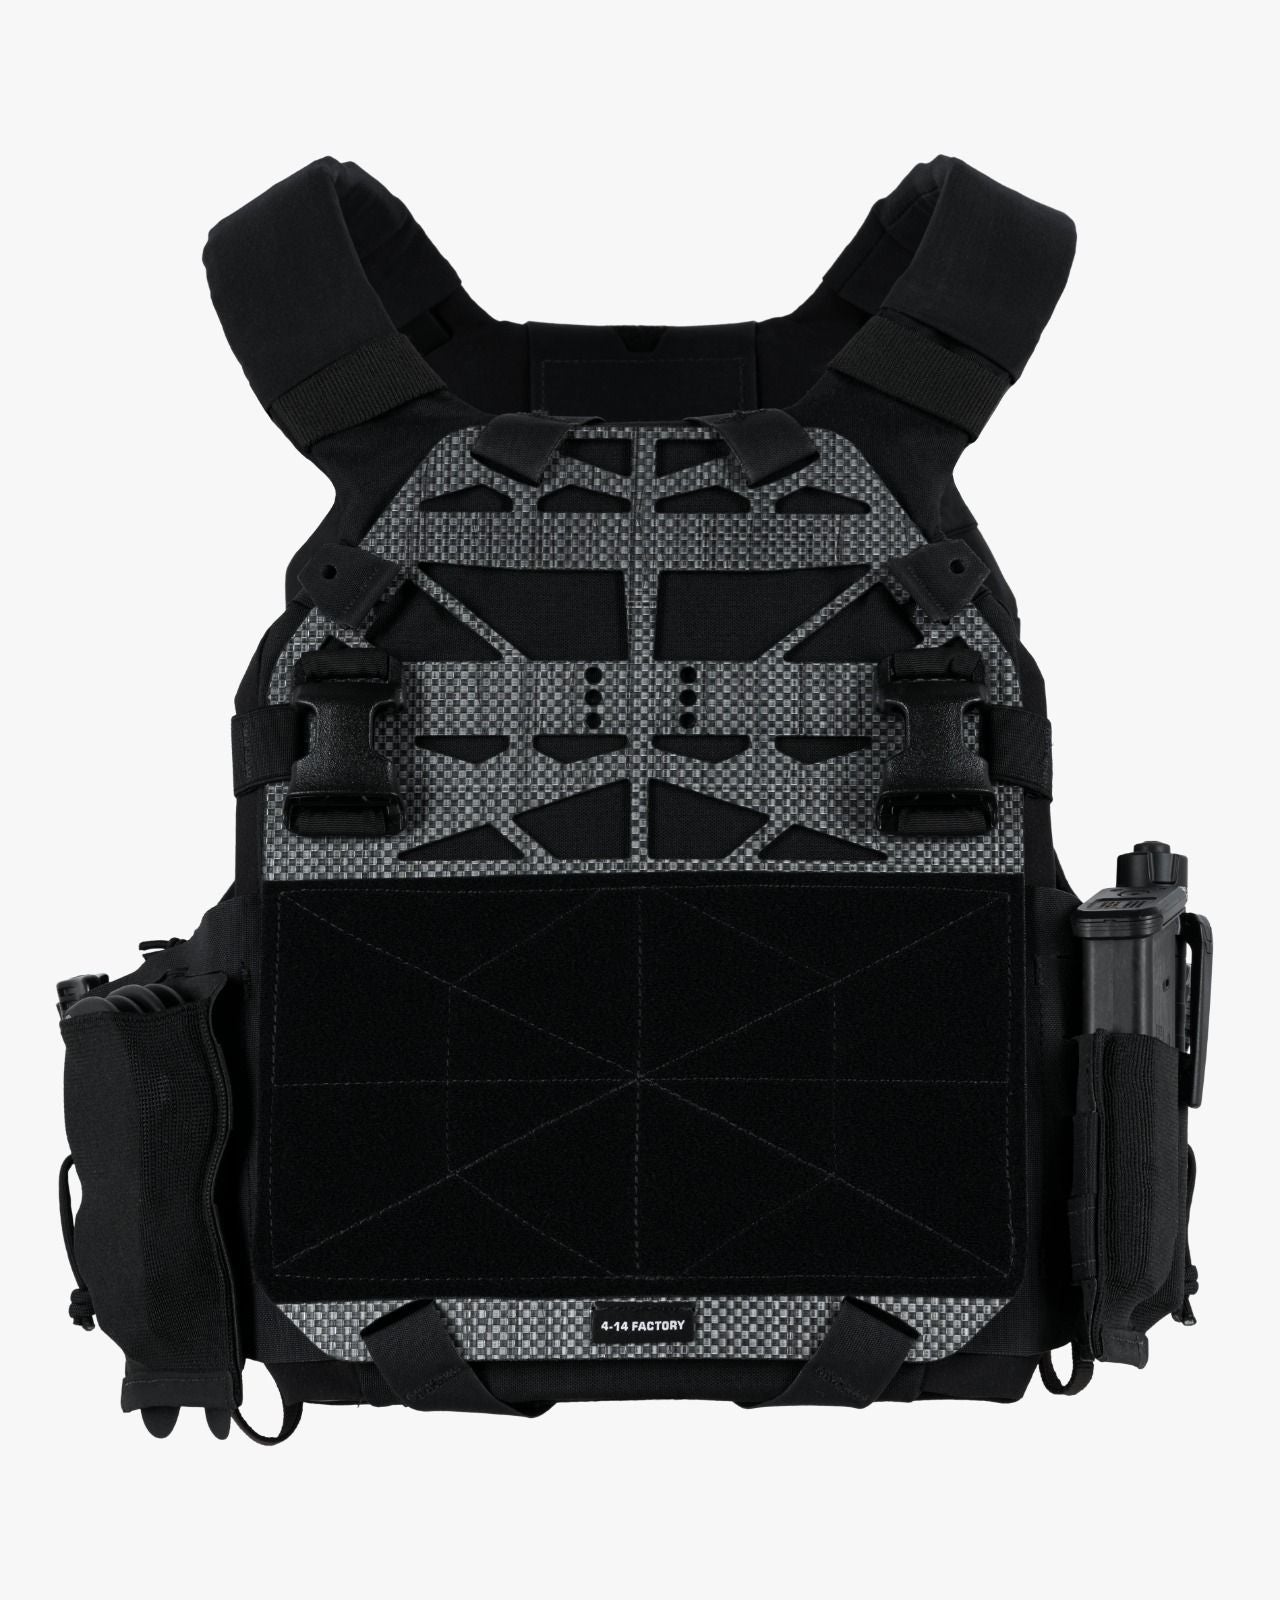 4-14 Adaptive Plate Carrier +  Cages - Ranger Green